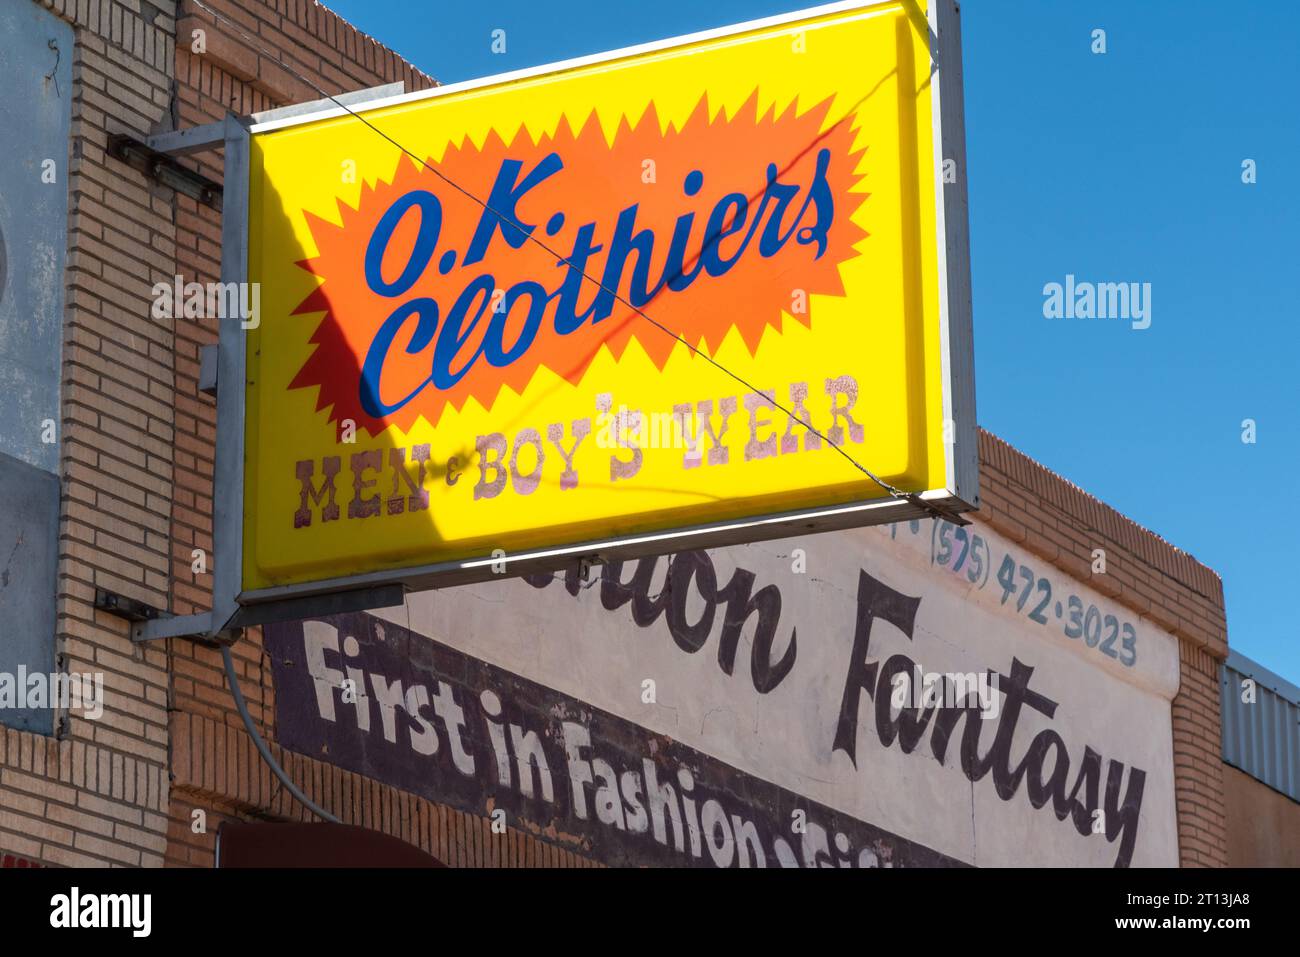 Bright yellow and orange sign for O.K. Clothiers, clothing store for men and boys that opened in 1935 and closed in 2019, Santa Rosa, New Mexico, USA. Stock Photo